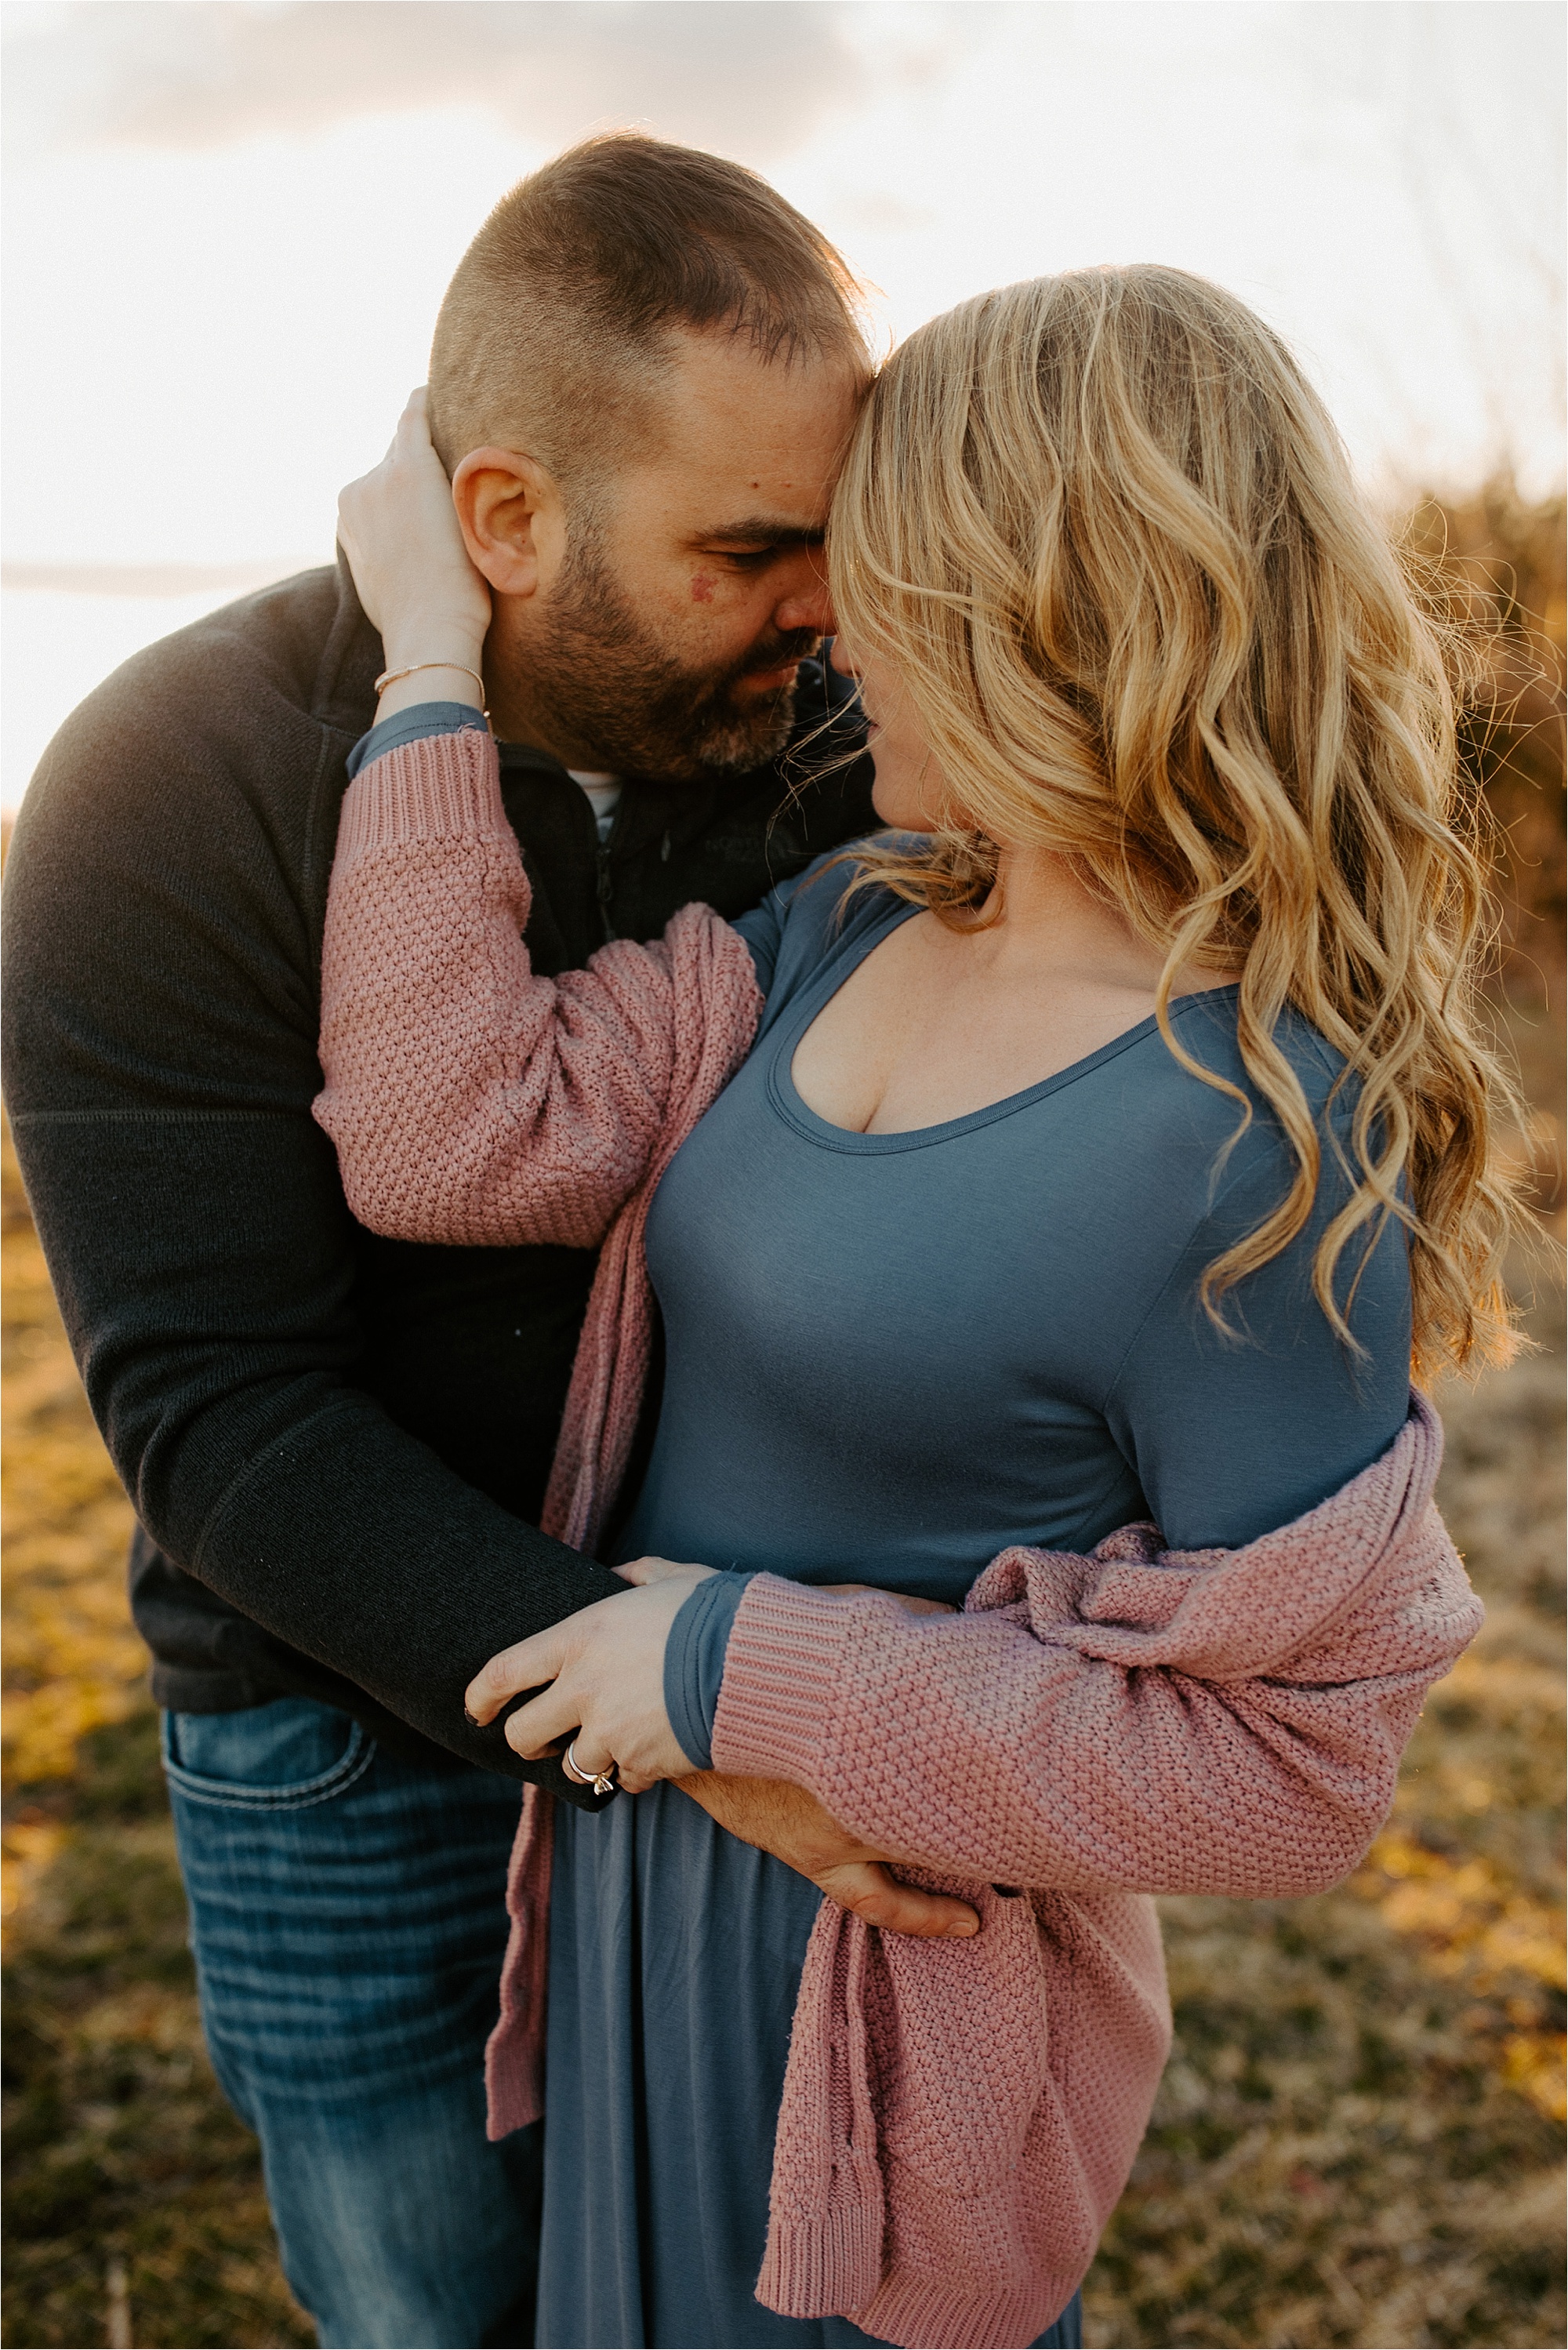 Sunset engagement session in the country of Kankakee, IL. Krystal Richmond is a natural light Engagement and Wedding Photographer in the Chicagoland area. 